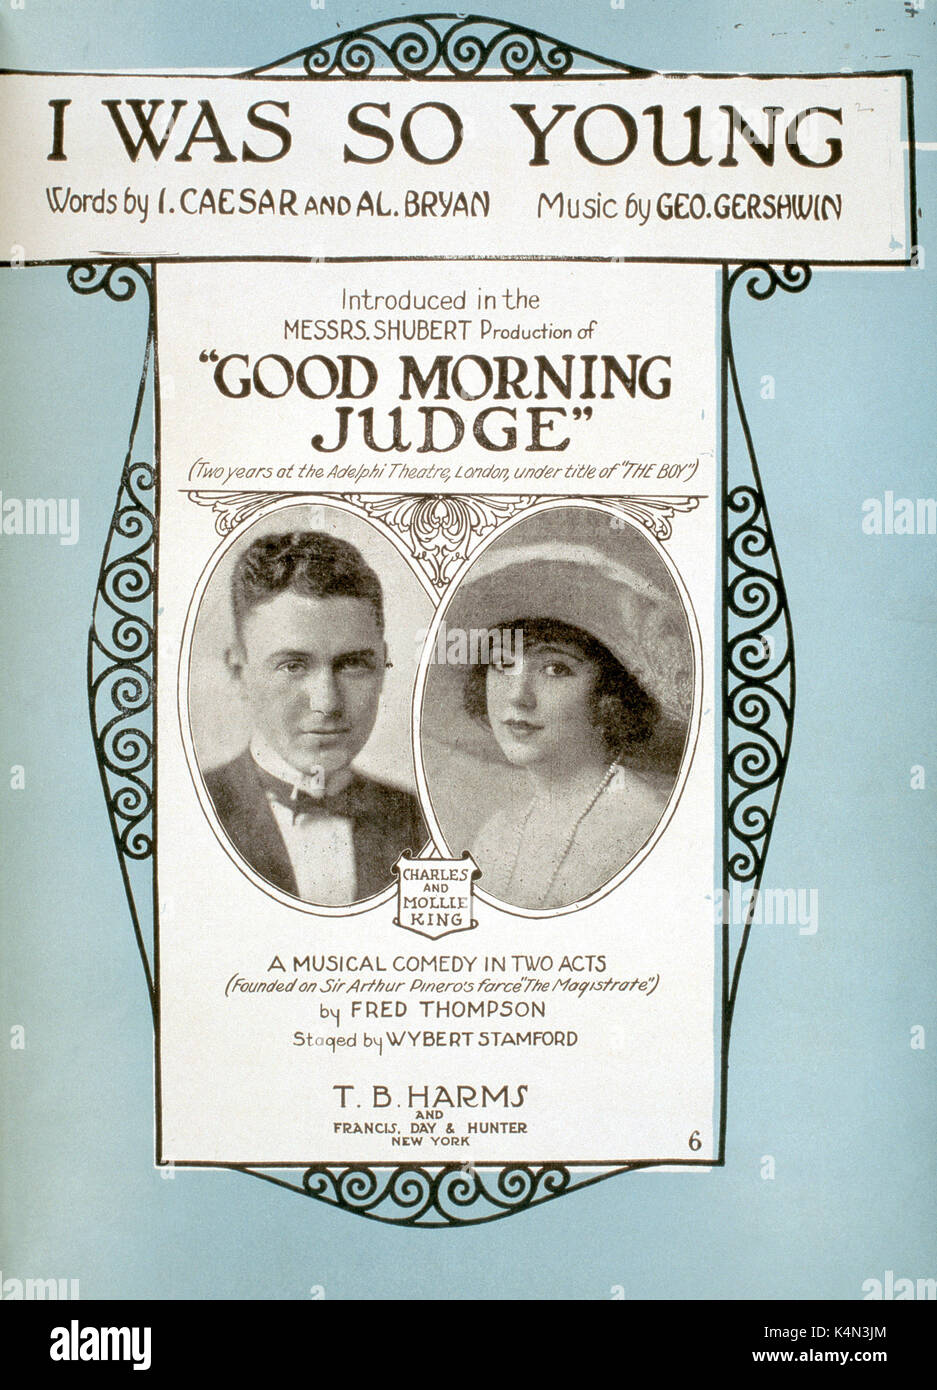 George Gershwin's 'I Was So Young' score cover. Song from 'Good Morning Judge'.  Photographs of Charles and Mollie King.  American composer and pianist (1898-1937). Stock Photo